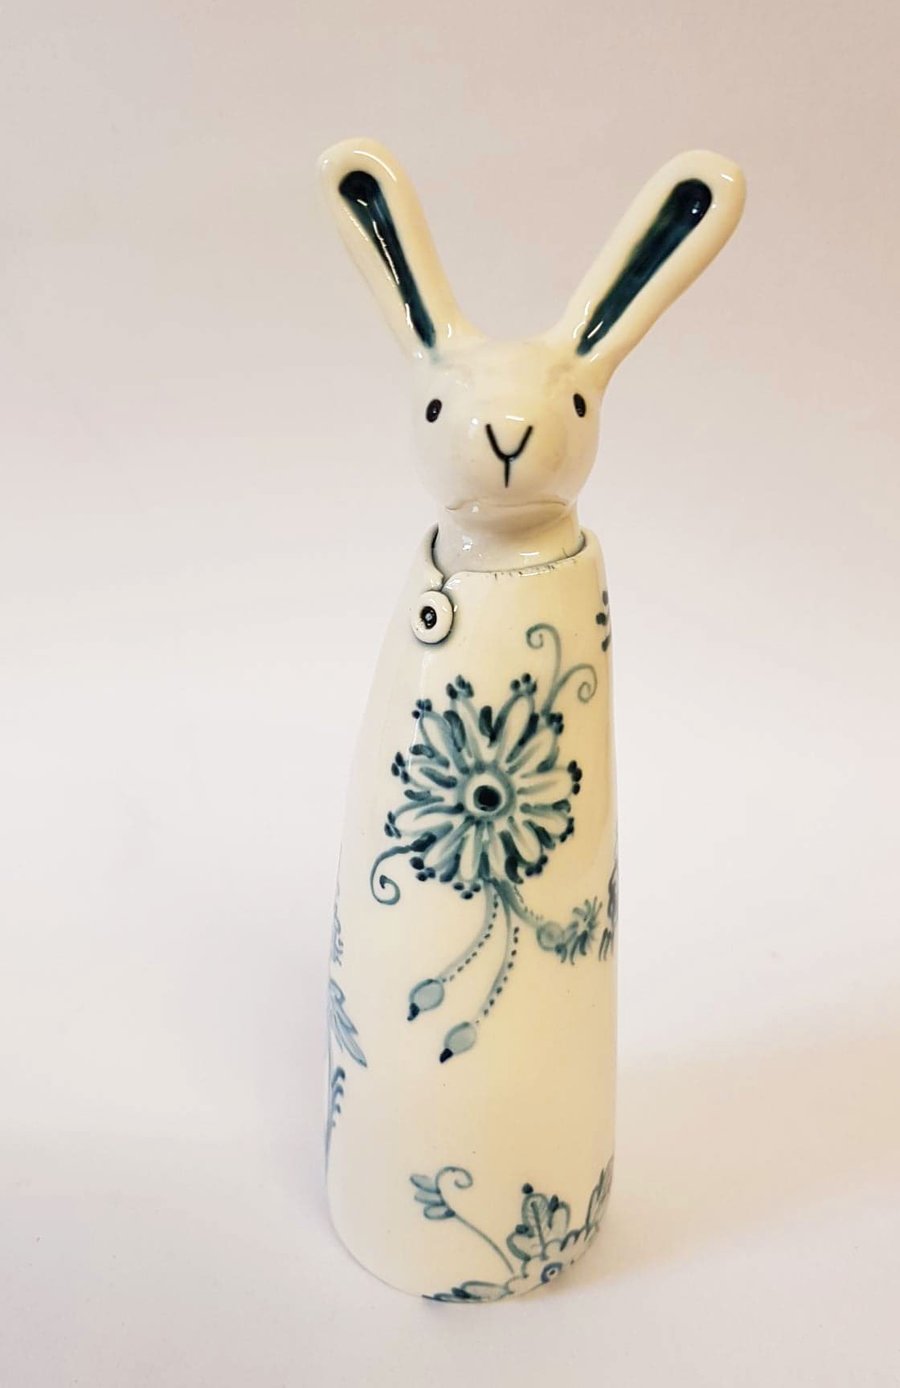 Delft Hare in blue and white - handpainted floral pattern